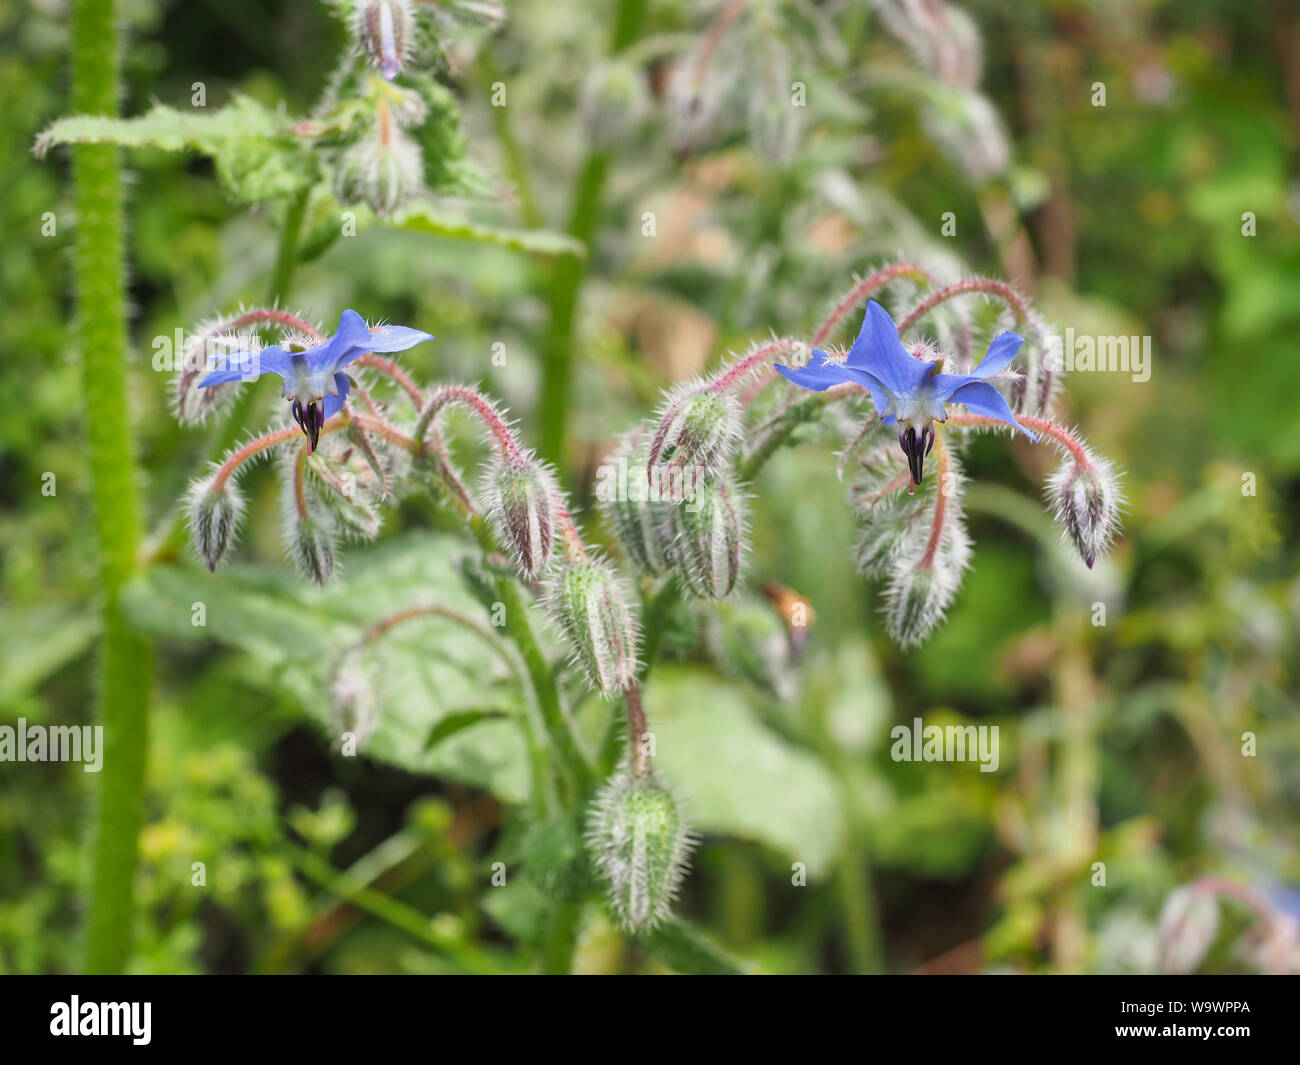 Blue Borage or Borago officinalis is herb in the flowering plant family Boraginaceae. Starflower borage was cultivated for culinary and medicinal uses Stock Photo